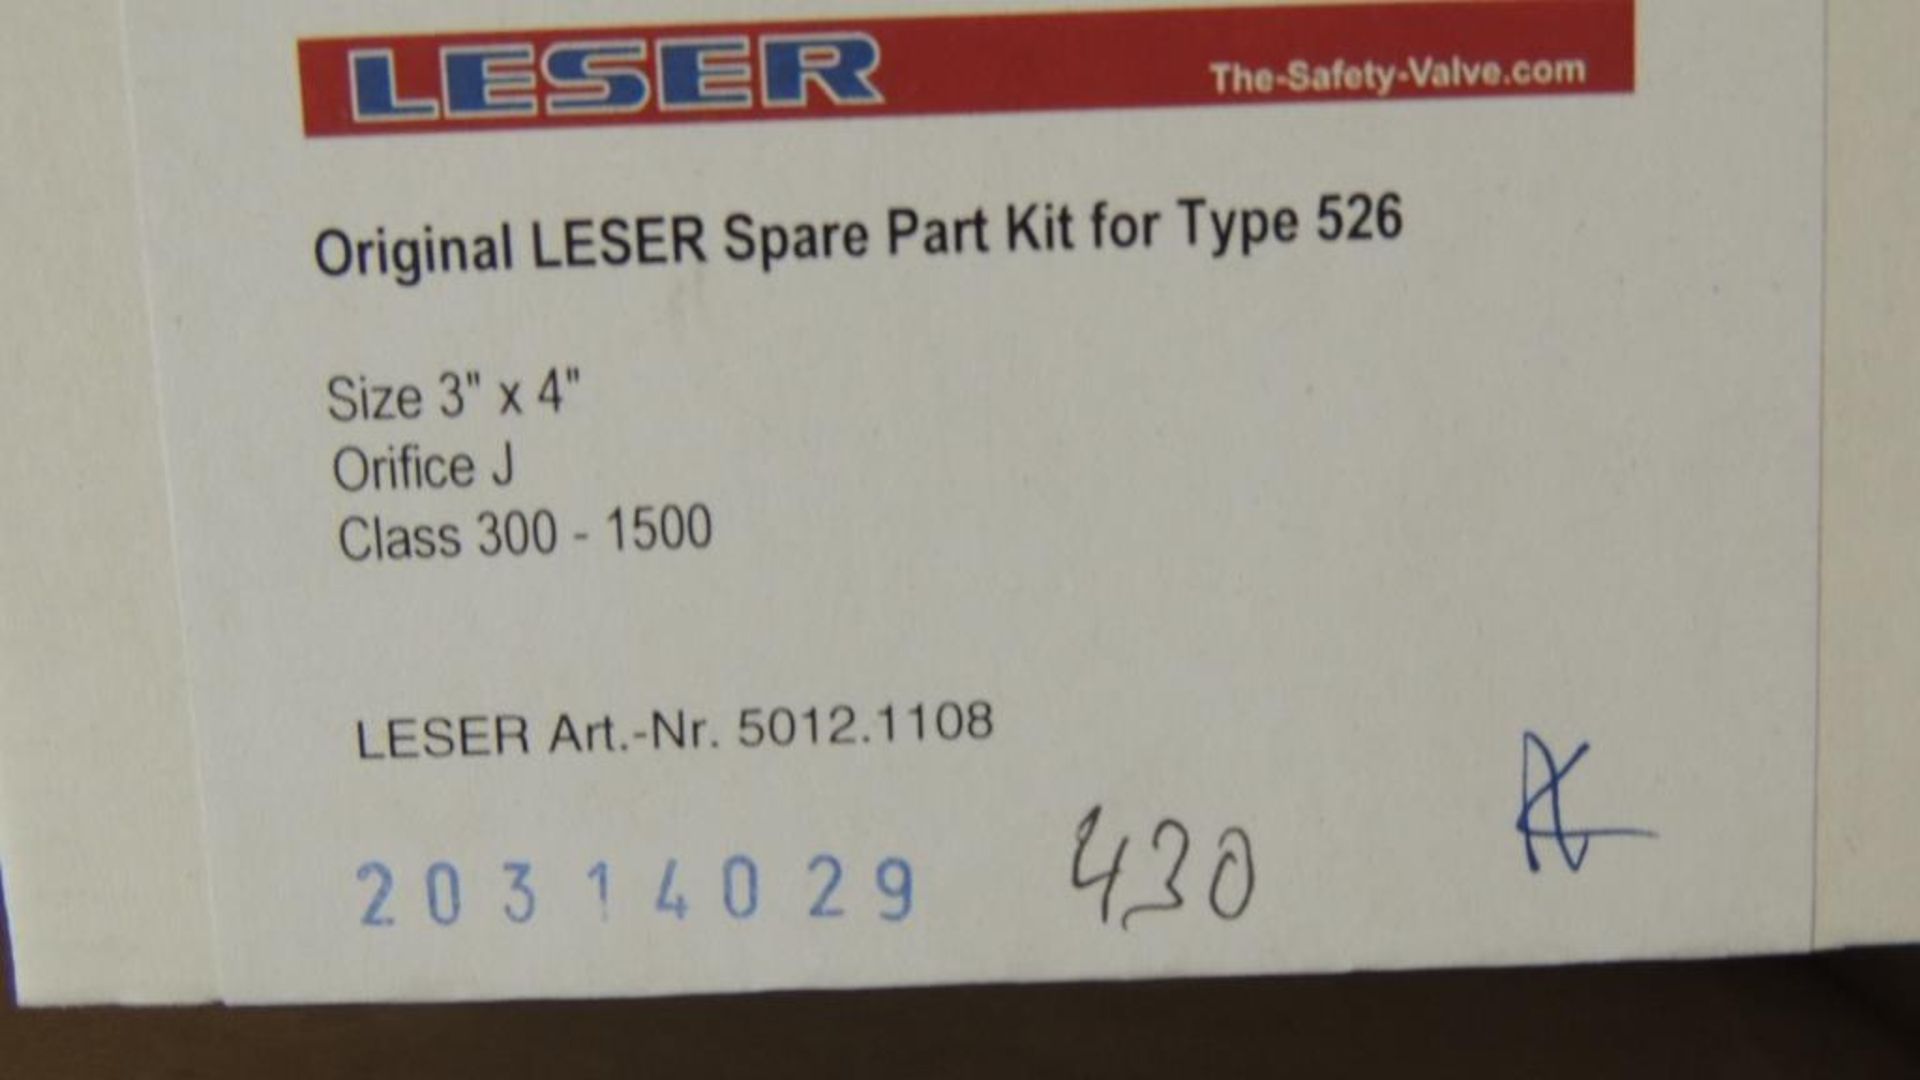 Large Quantity of Leser Relief and Safety Valves, plus Spare Parts Kits - Image 27 of 374